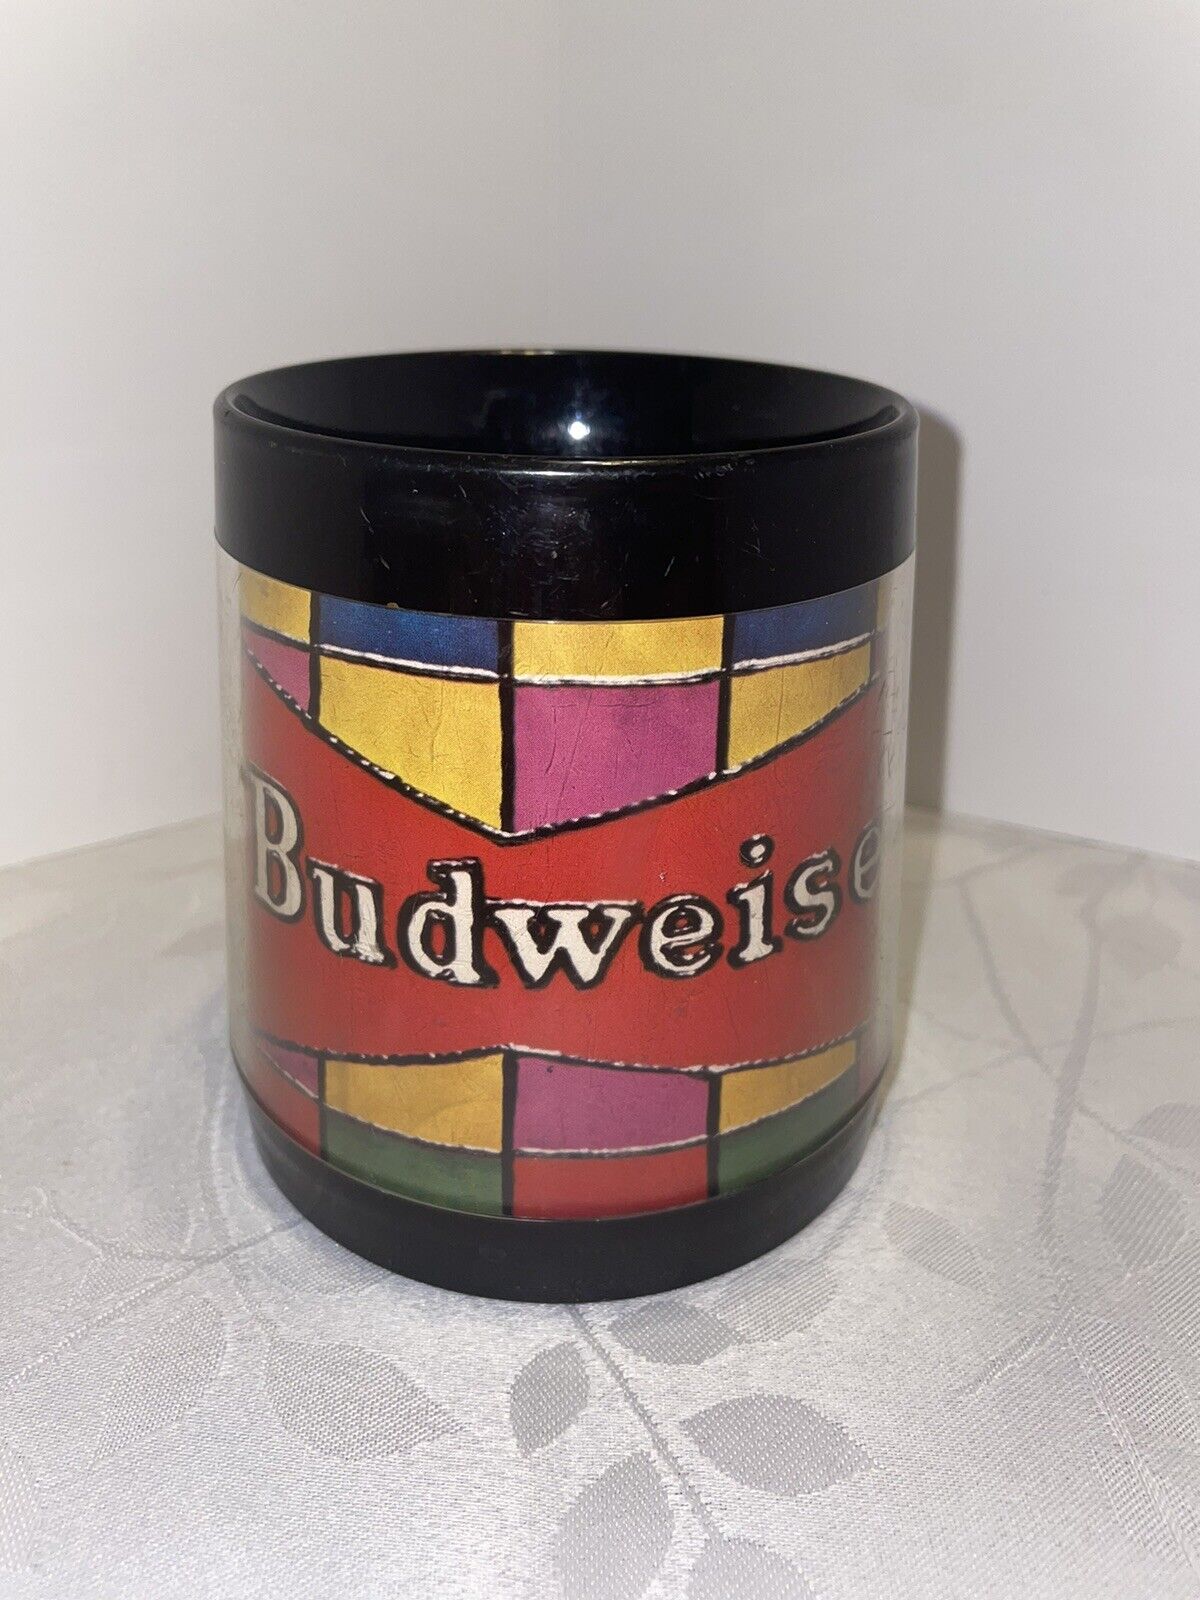 1970s BUDWEISER BEER STAINED GLASS WINDOW DESIGN THERMO-SERV PLASTIC COFFEE MUG